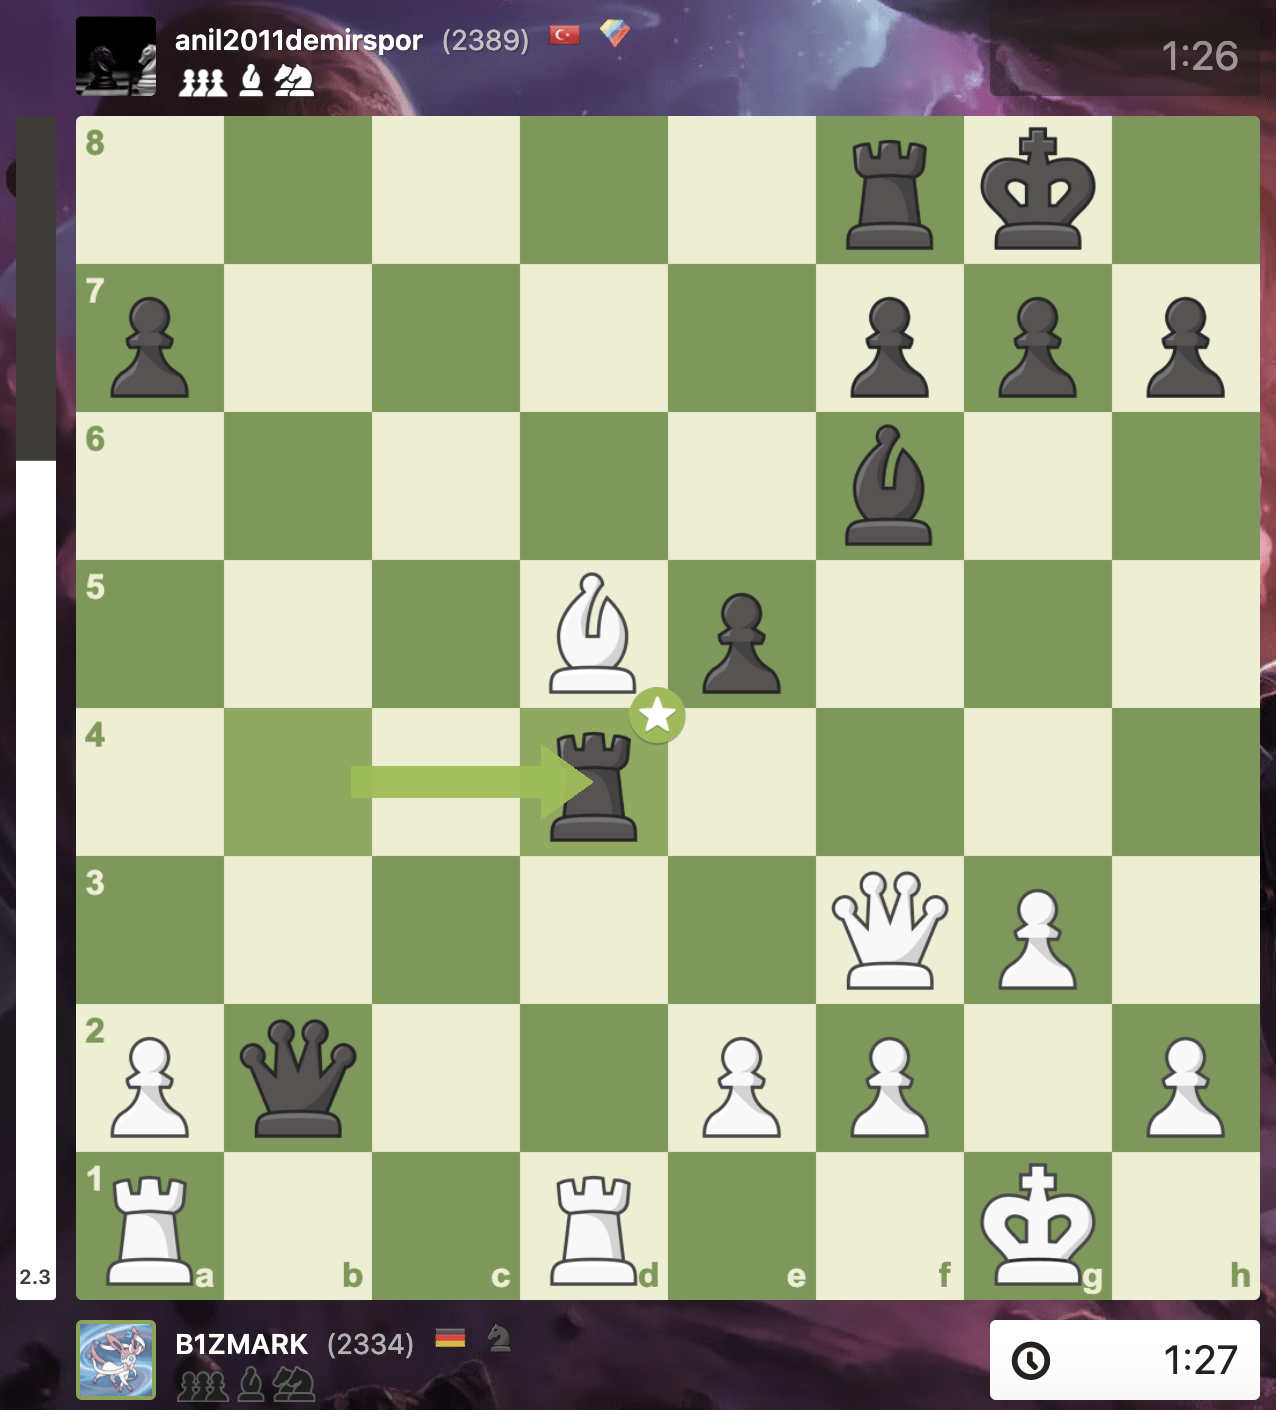 Why is e6 better than e5 in this opening? - Chess Forums 